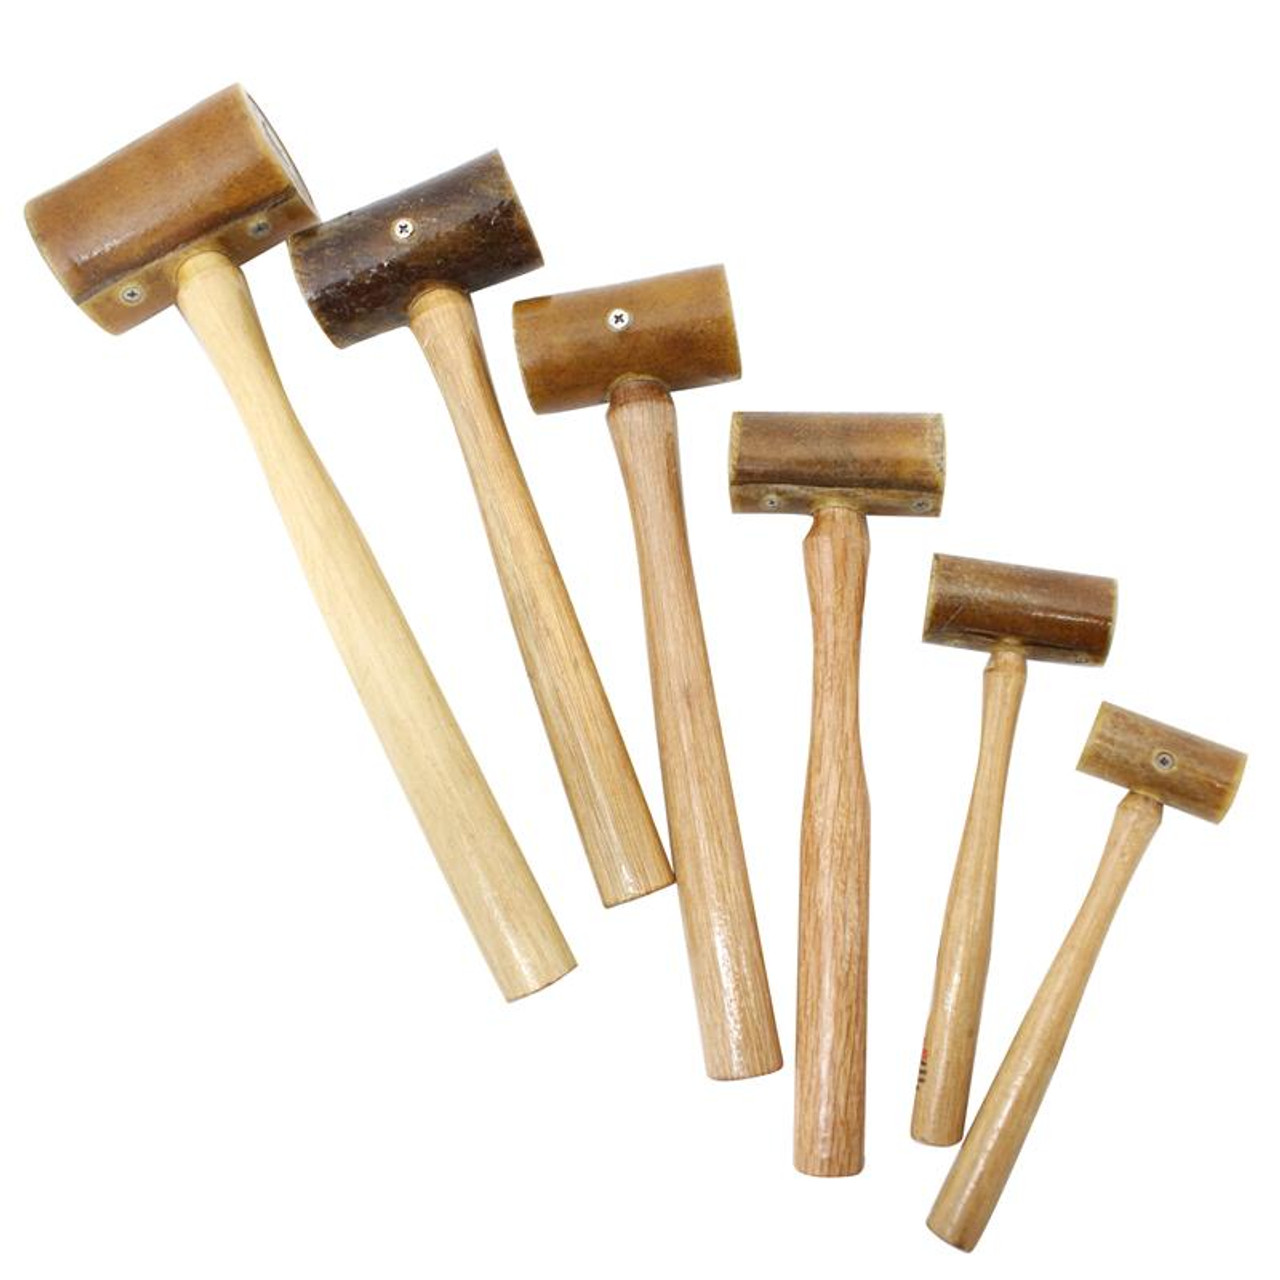 Grobet Rawhide Mallets for Jewelry Repair 1 1/4 by 2 1/2 Inch